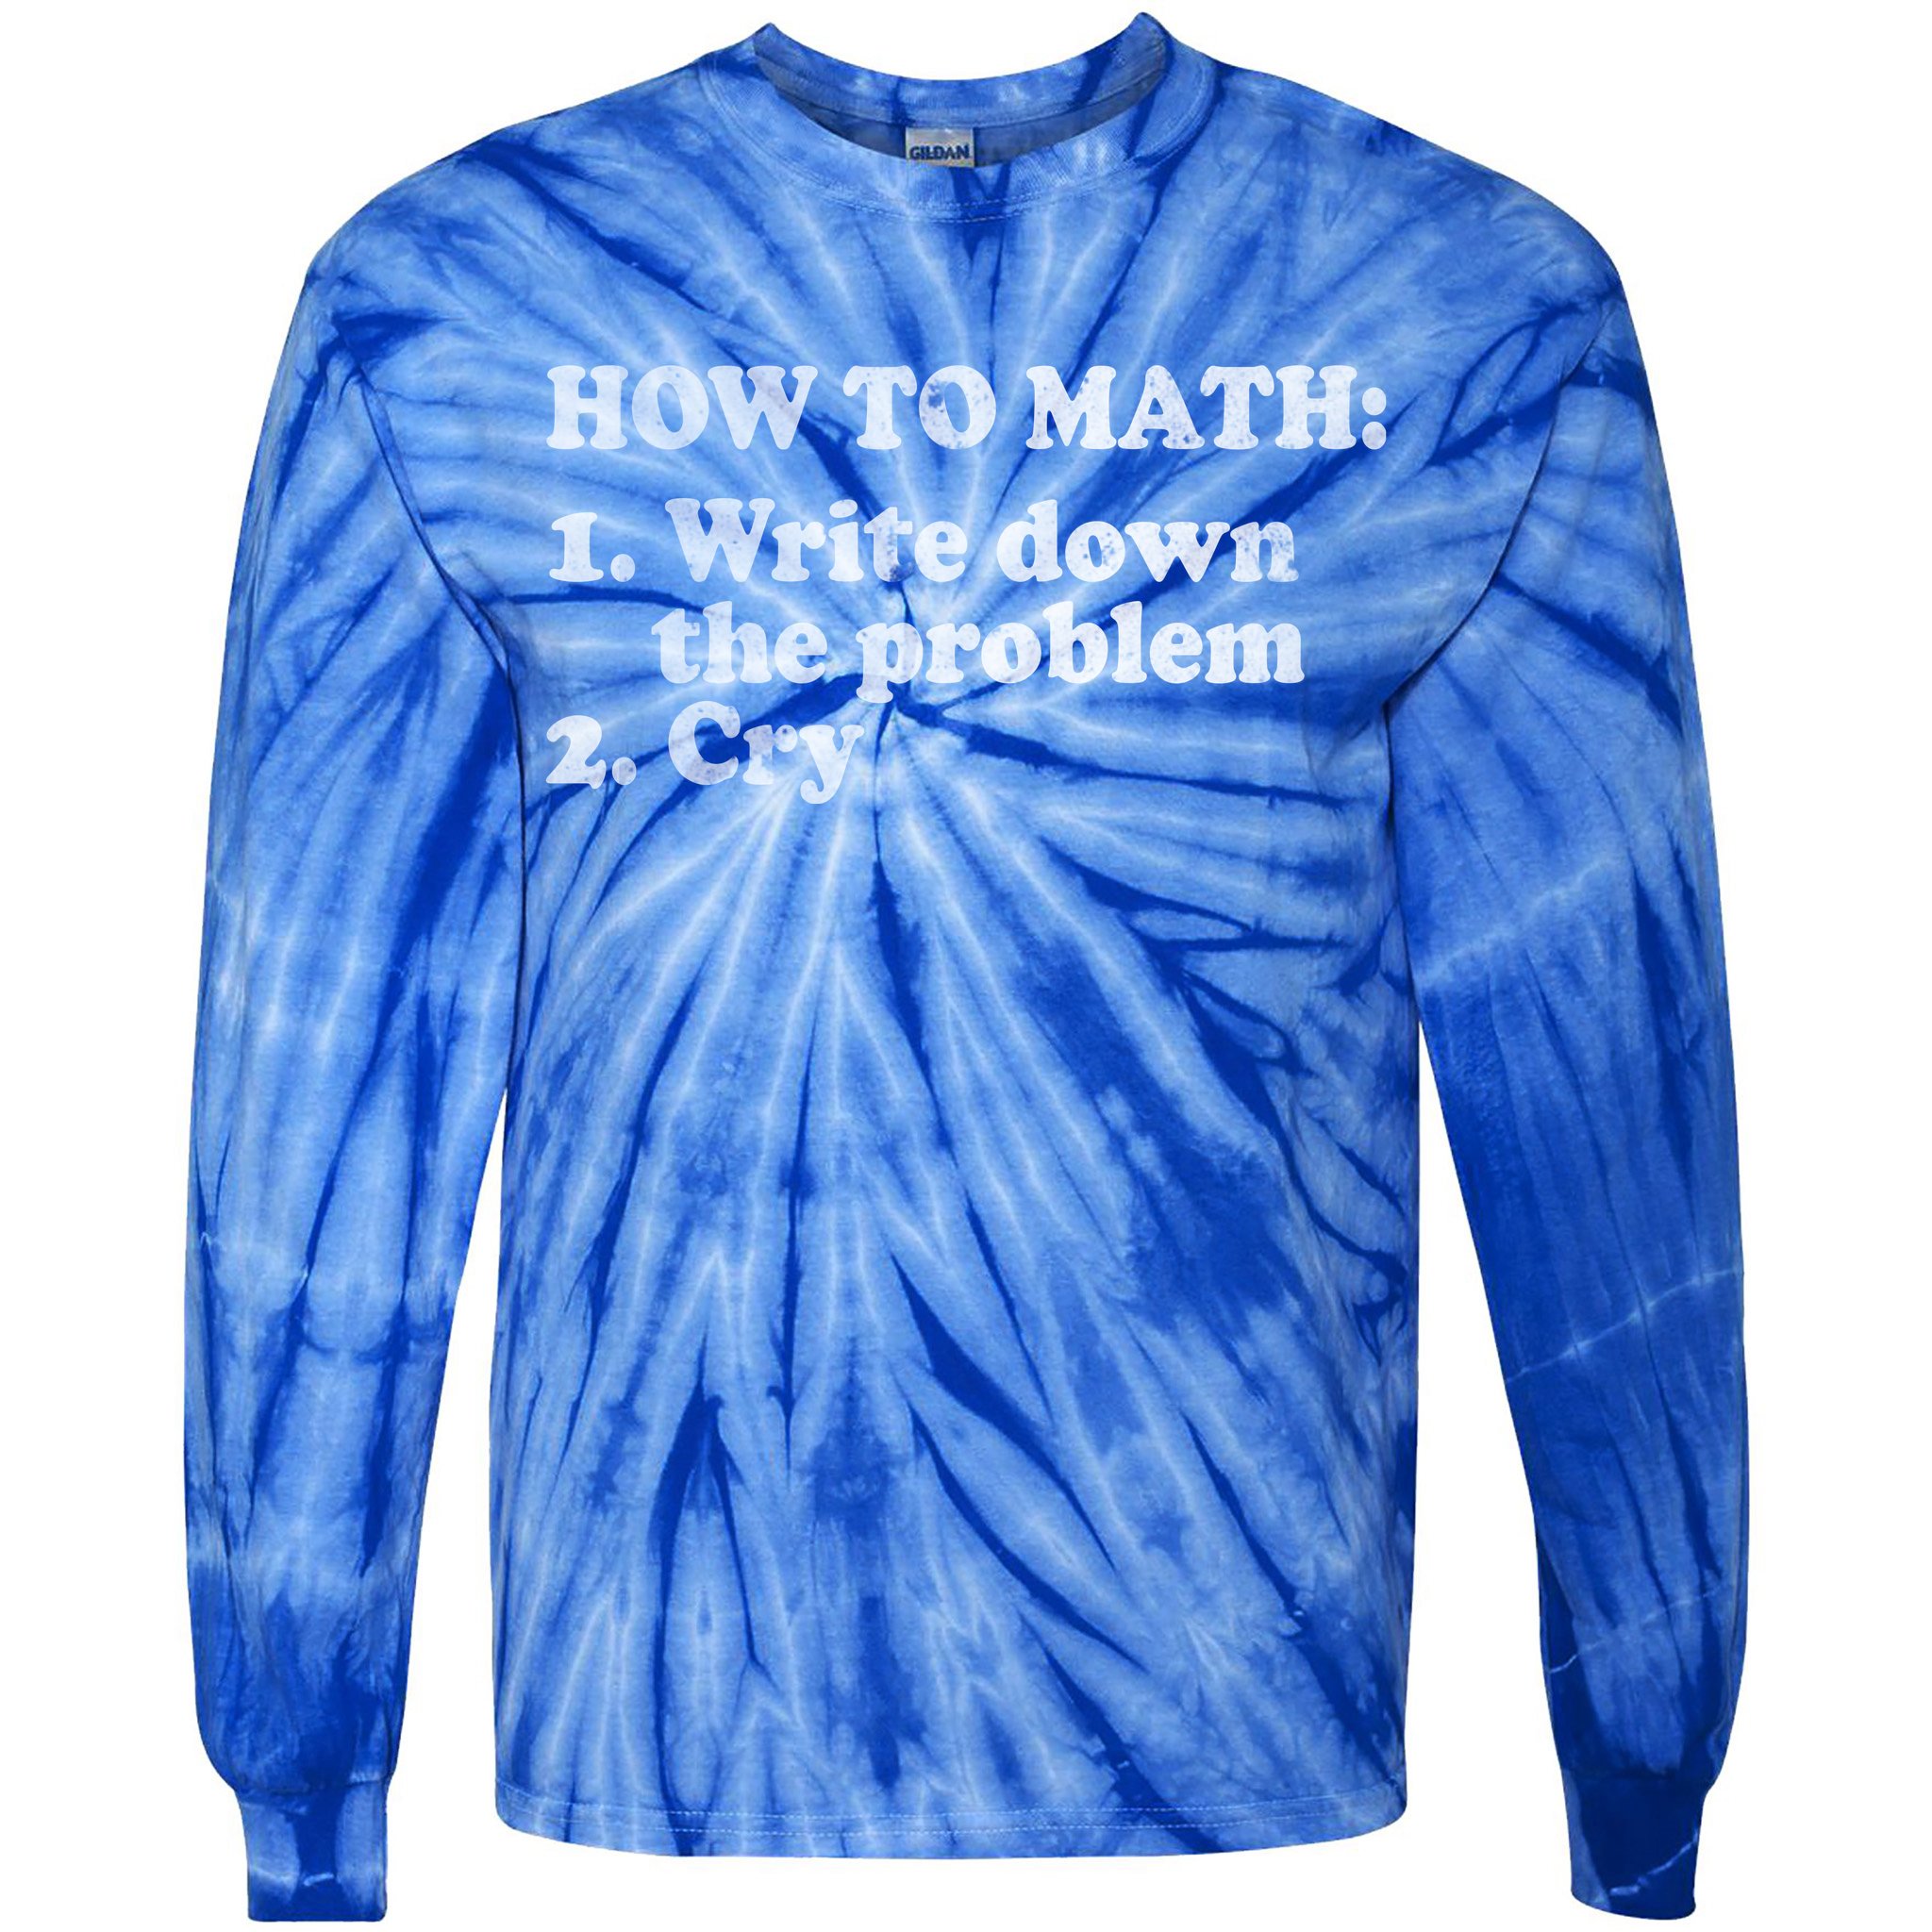 How to Fix a Messed up Tie Dye Shirt